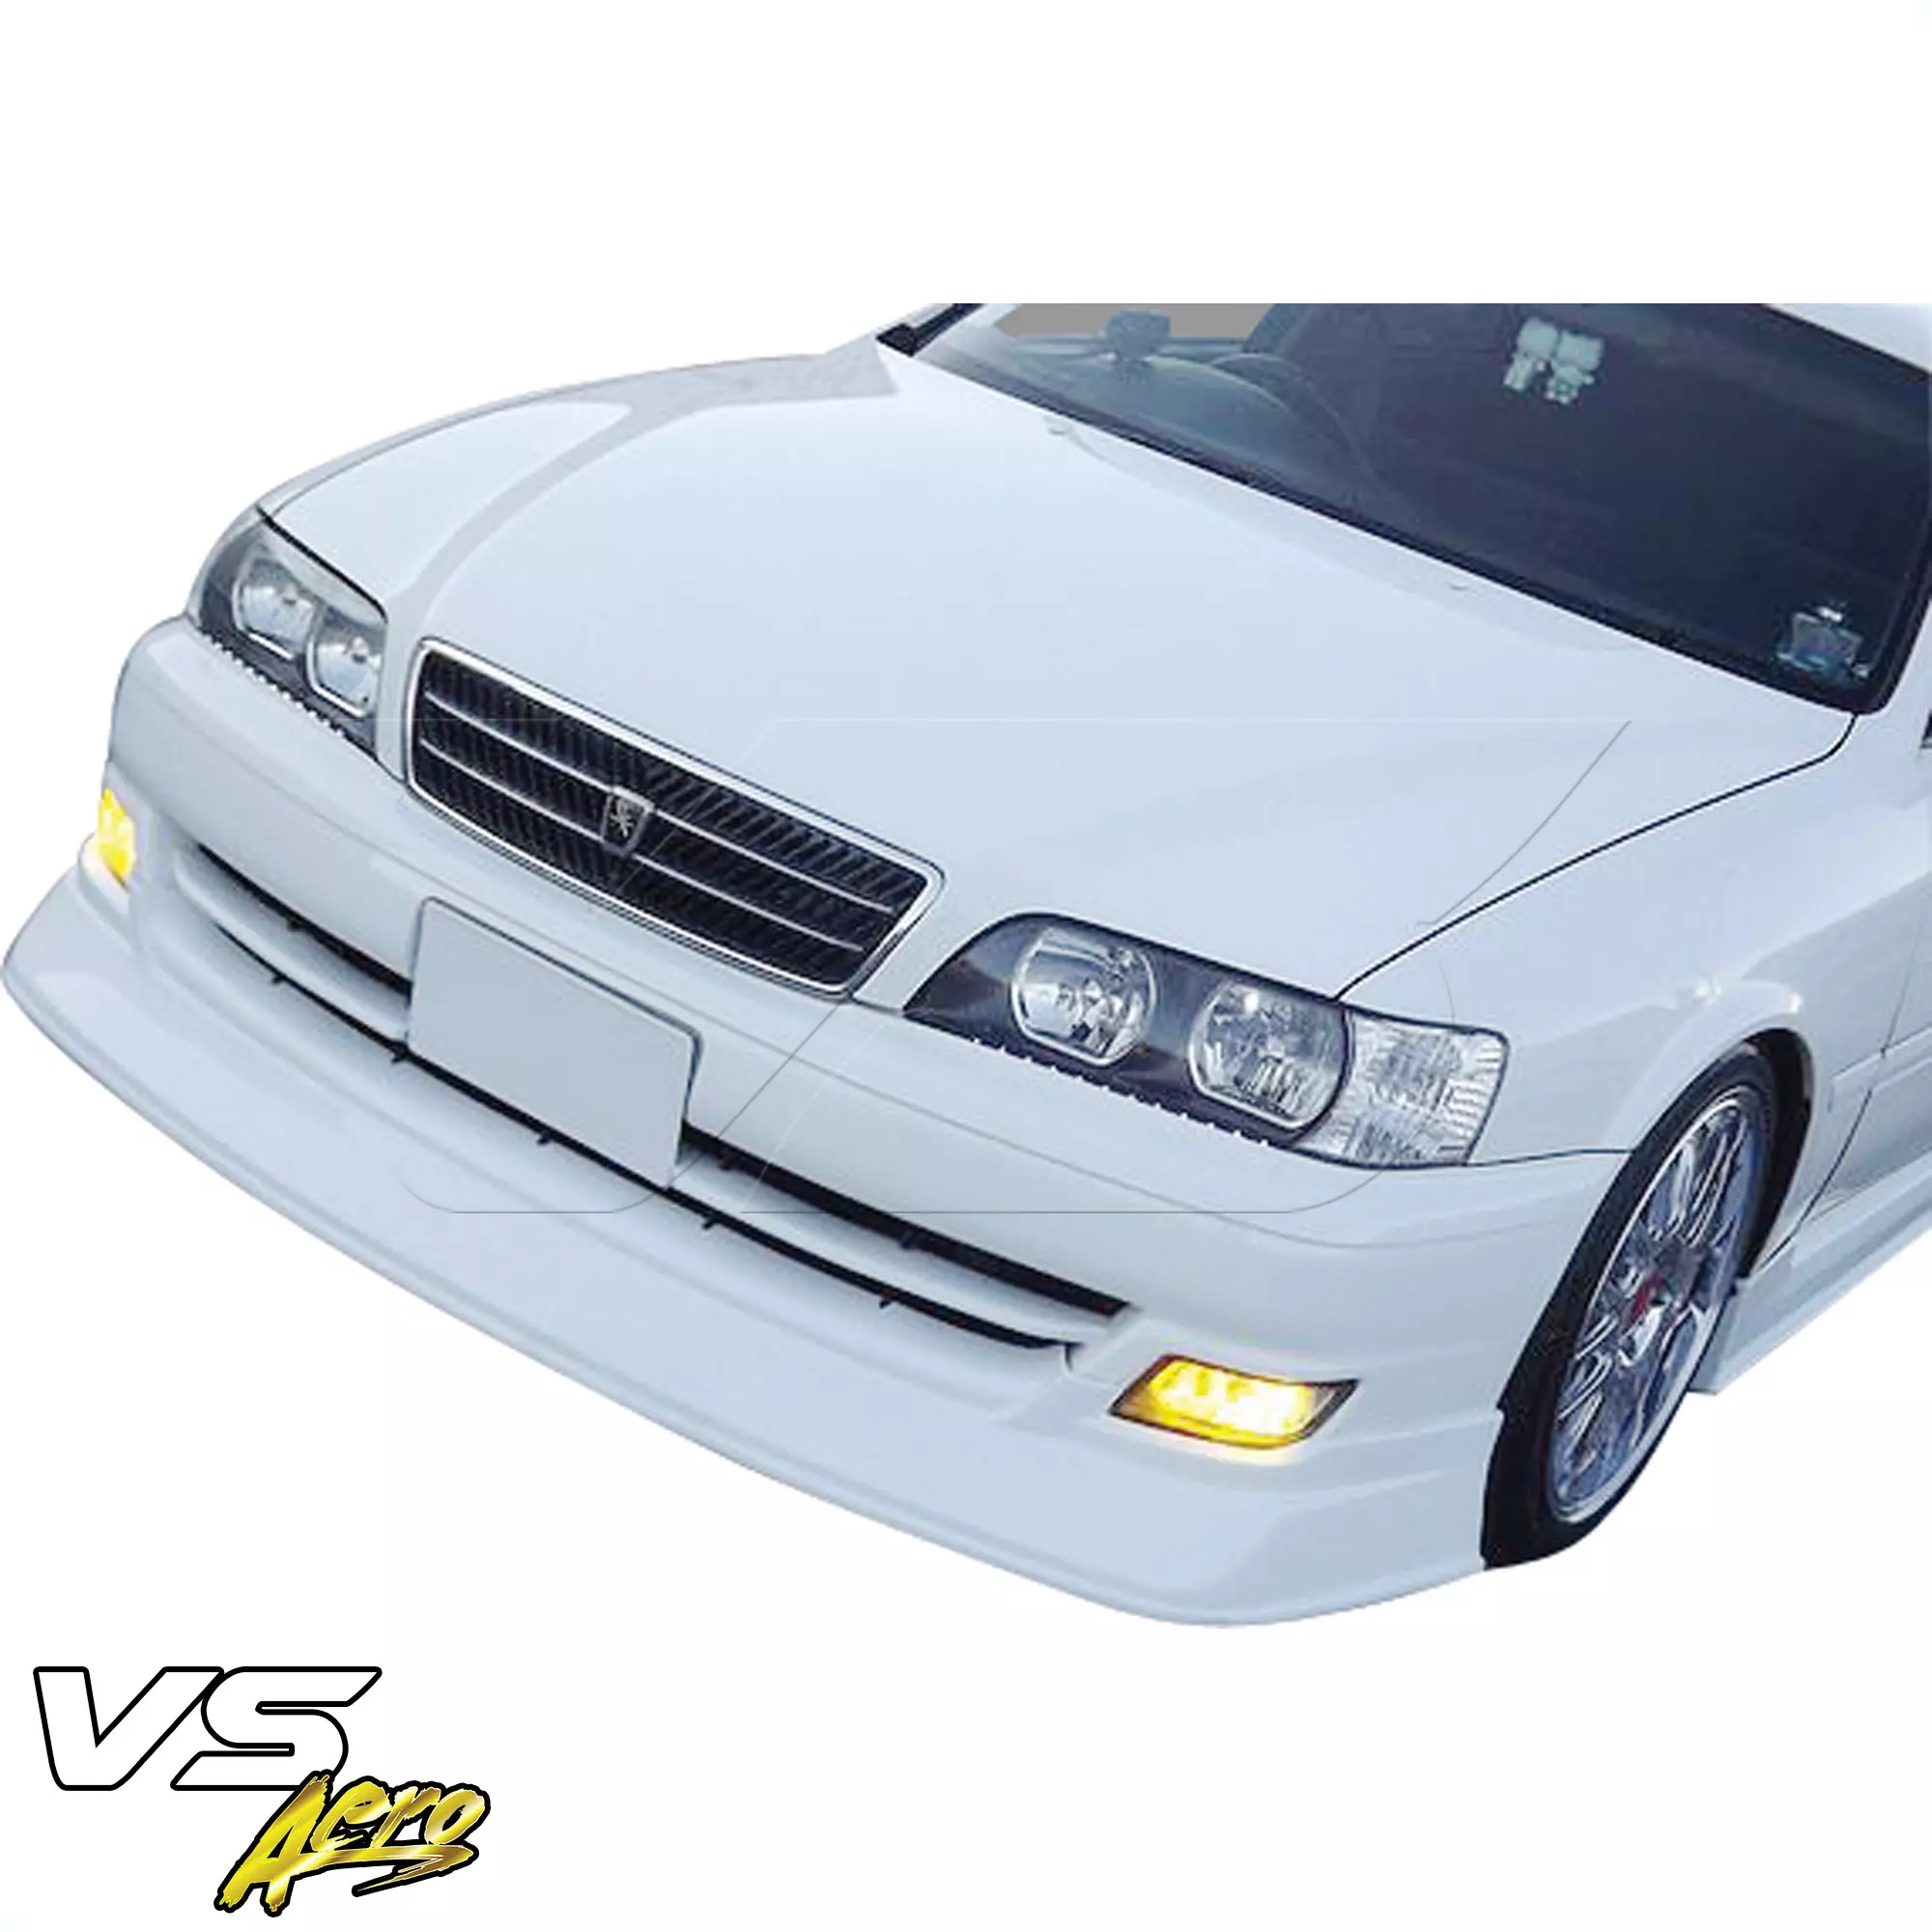 VSaero FRP TRAU Late Front Lip Valance > Toyota Chaser JZX100 1999-2000 - Image 7